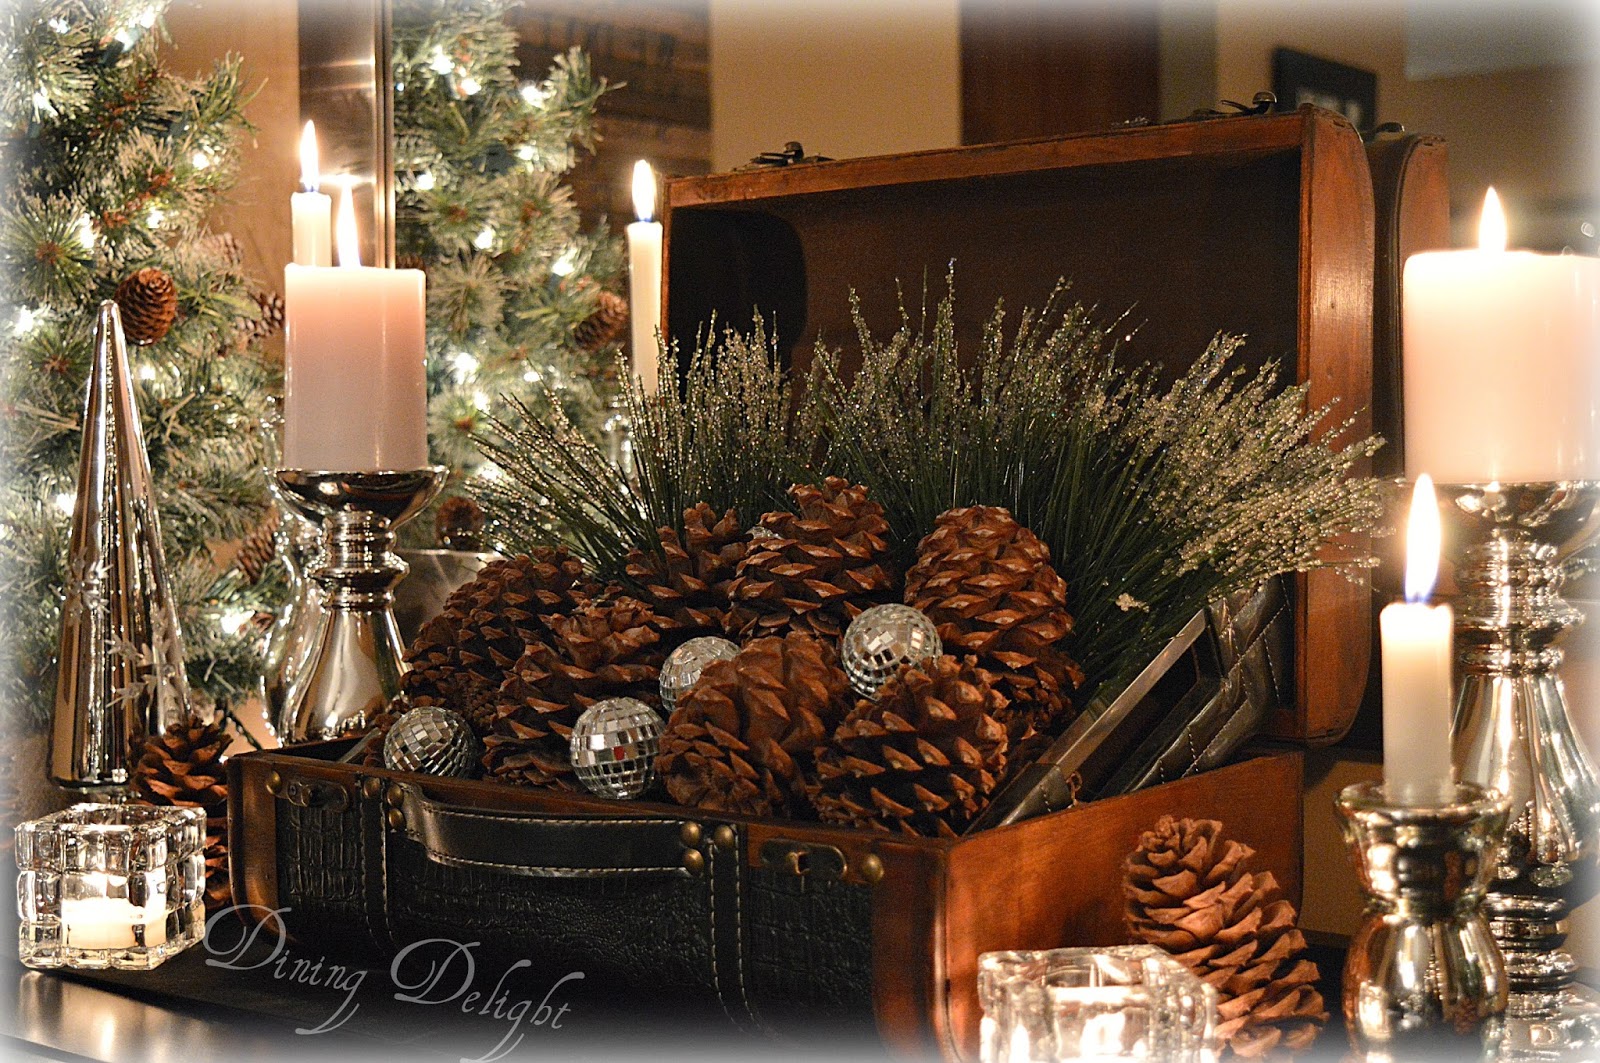 Dining Delight Pine Cones & Candles for Christmas